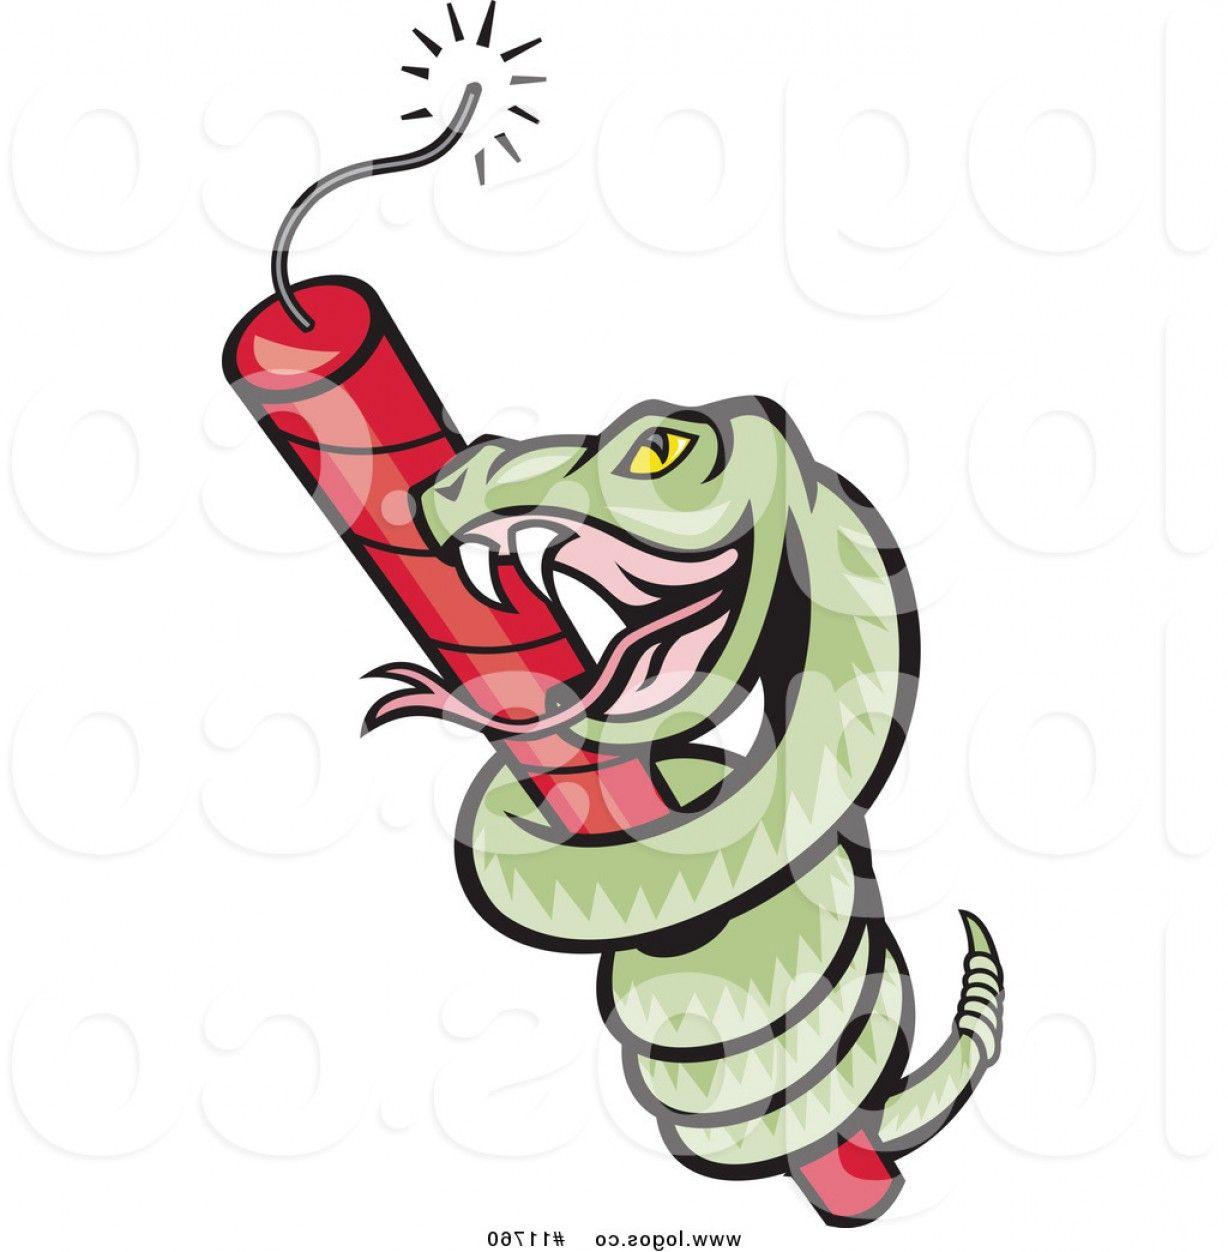 Rattlesnake Logo - Royalty Free Vector Of A Rattle Snake Coiled Around Dynamite Logo